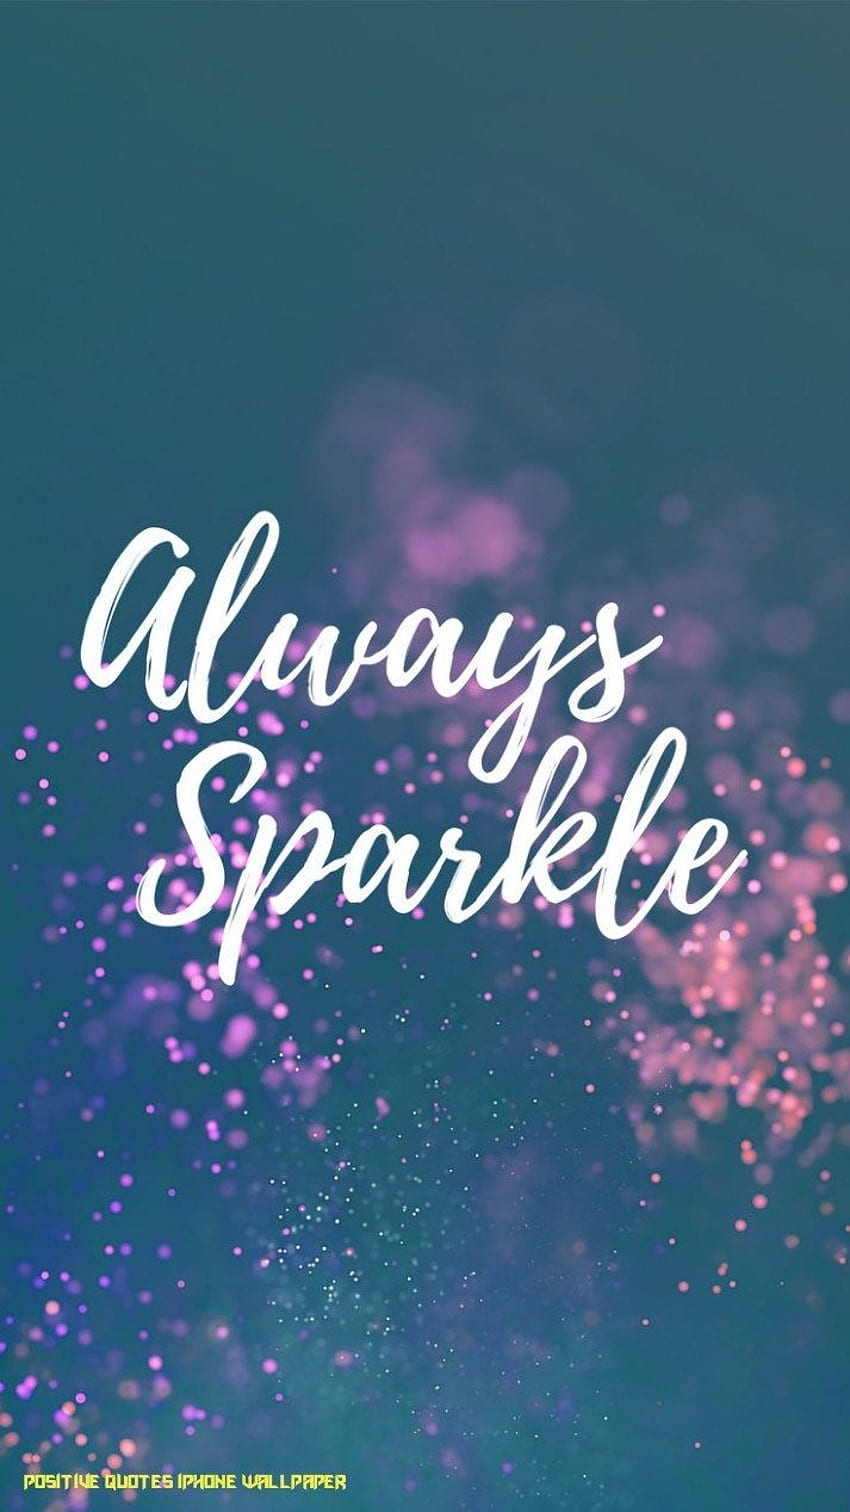 Inspirational Quotes iPhone Always Sparkle – iPhone HD phone wallpaper